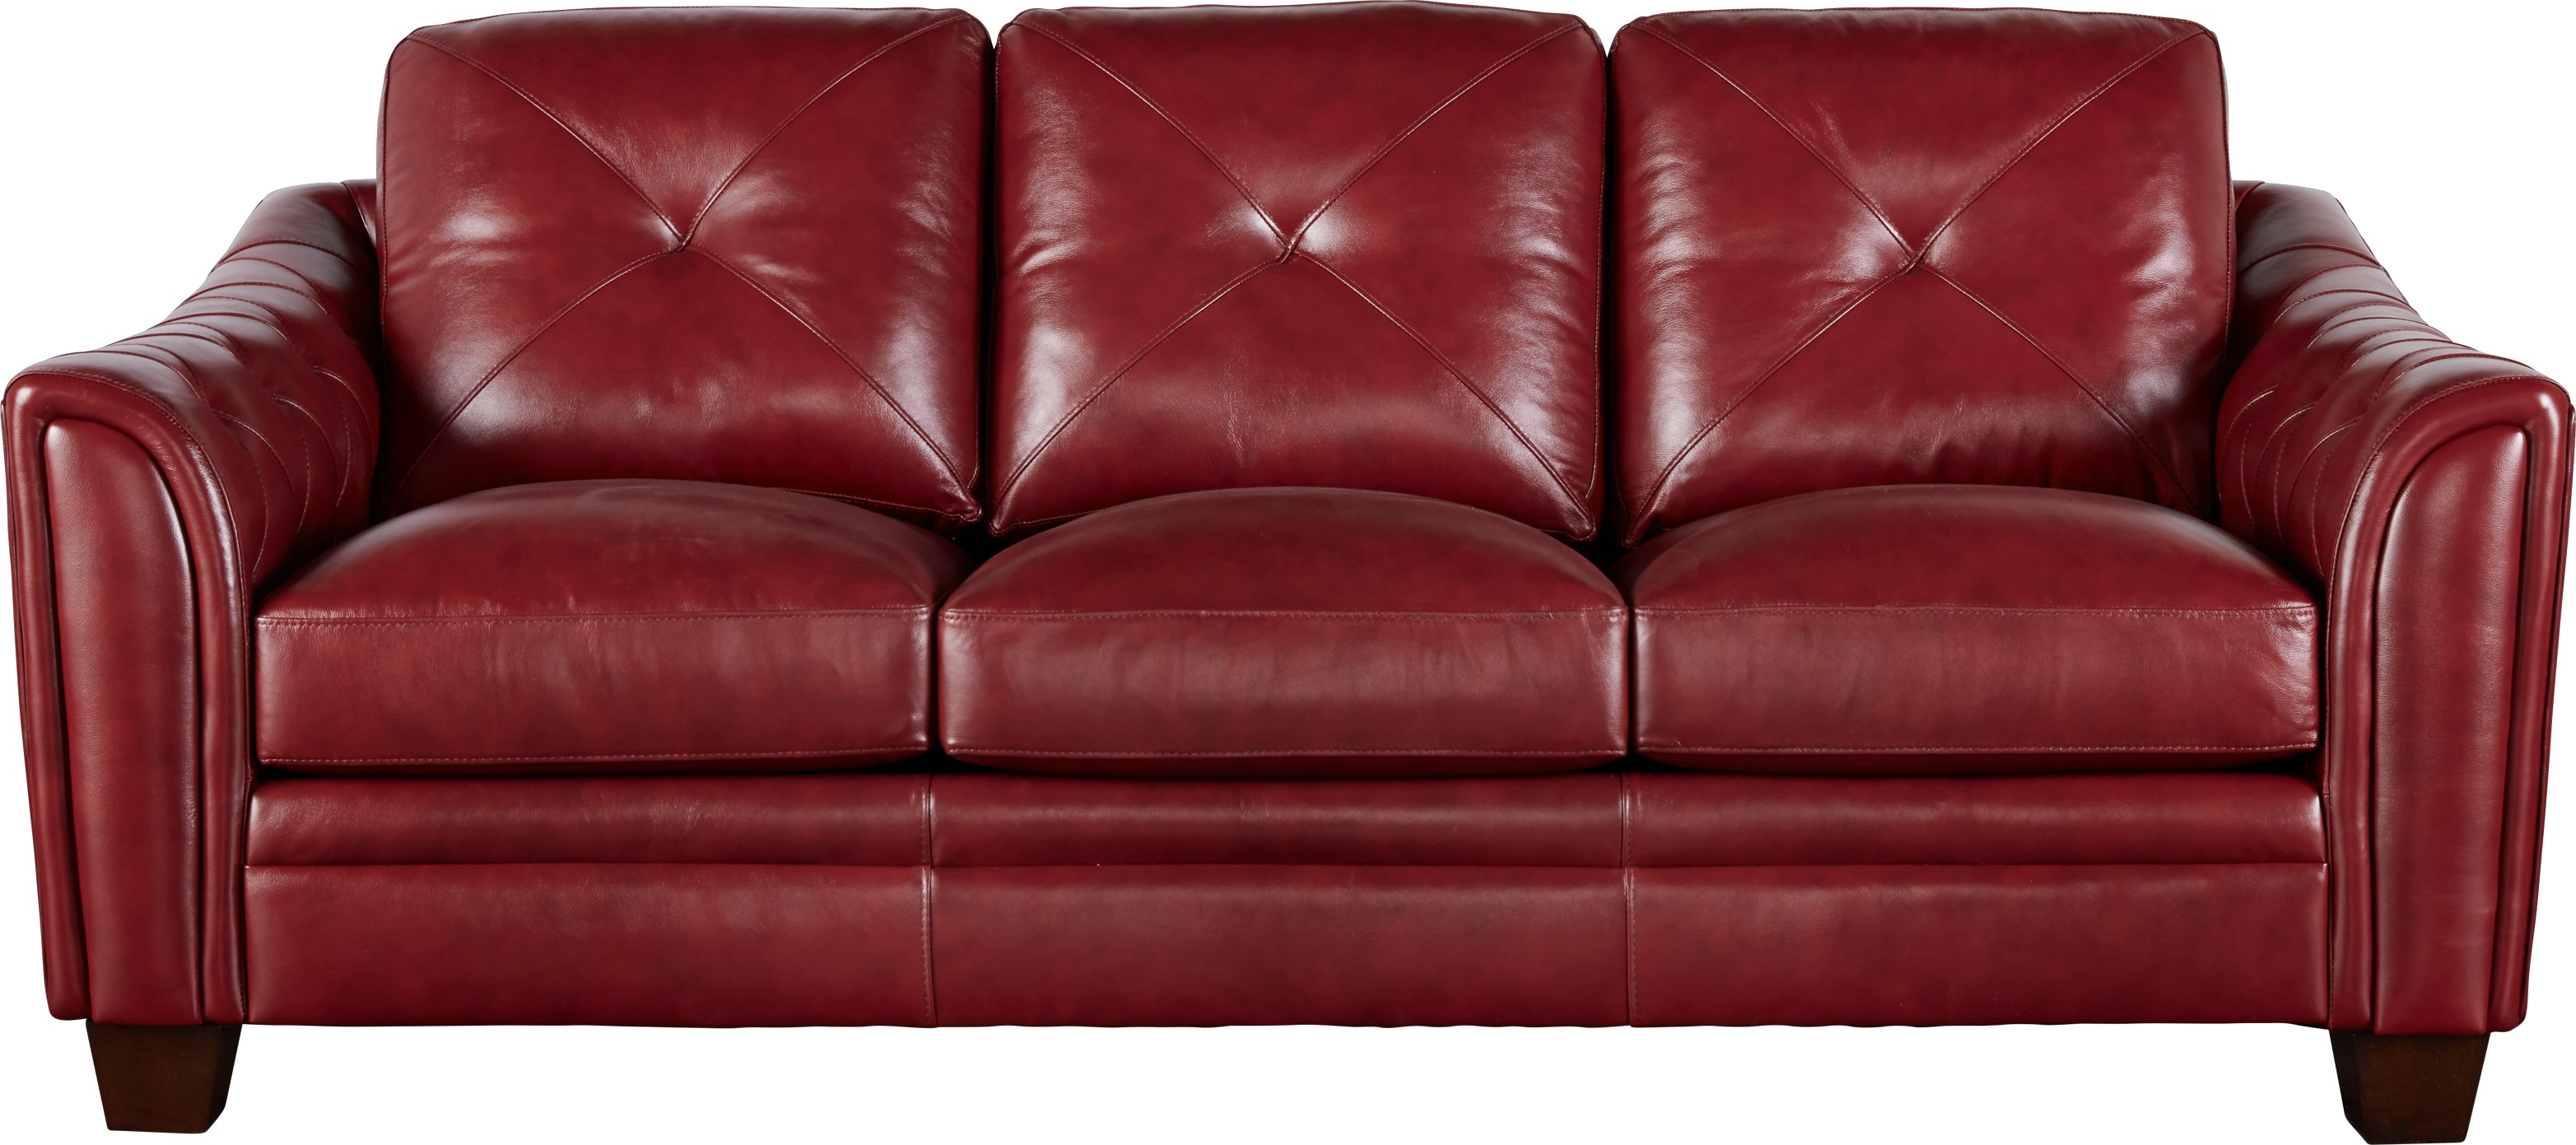 rugs for red leather sofa